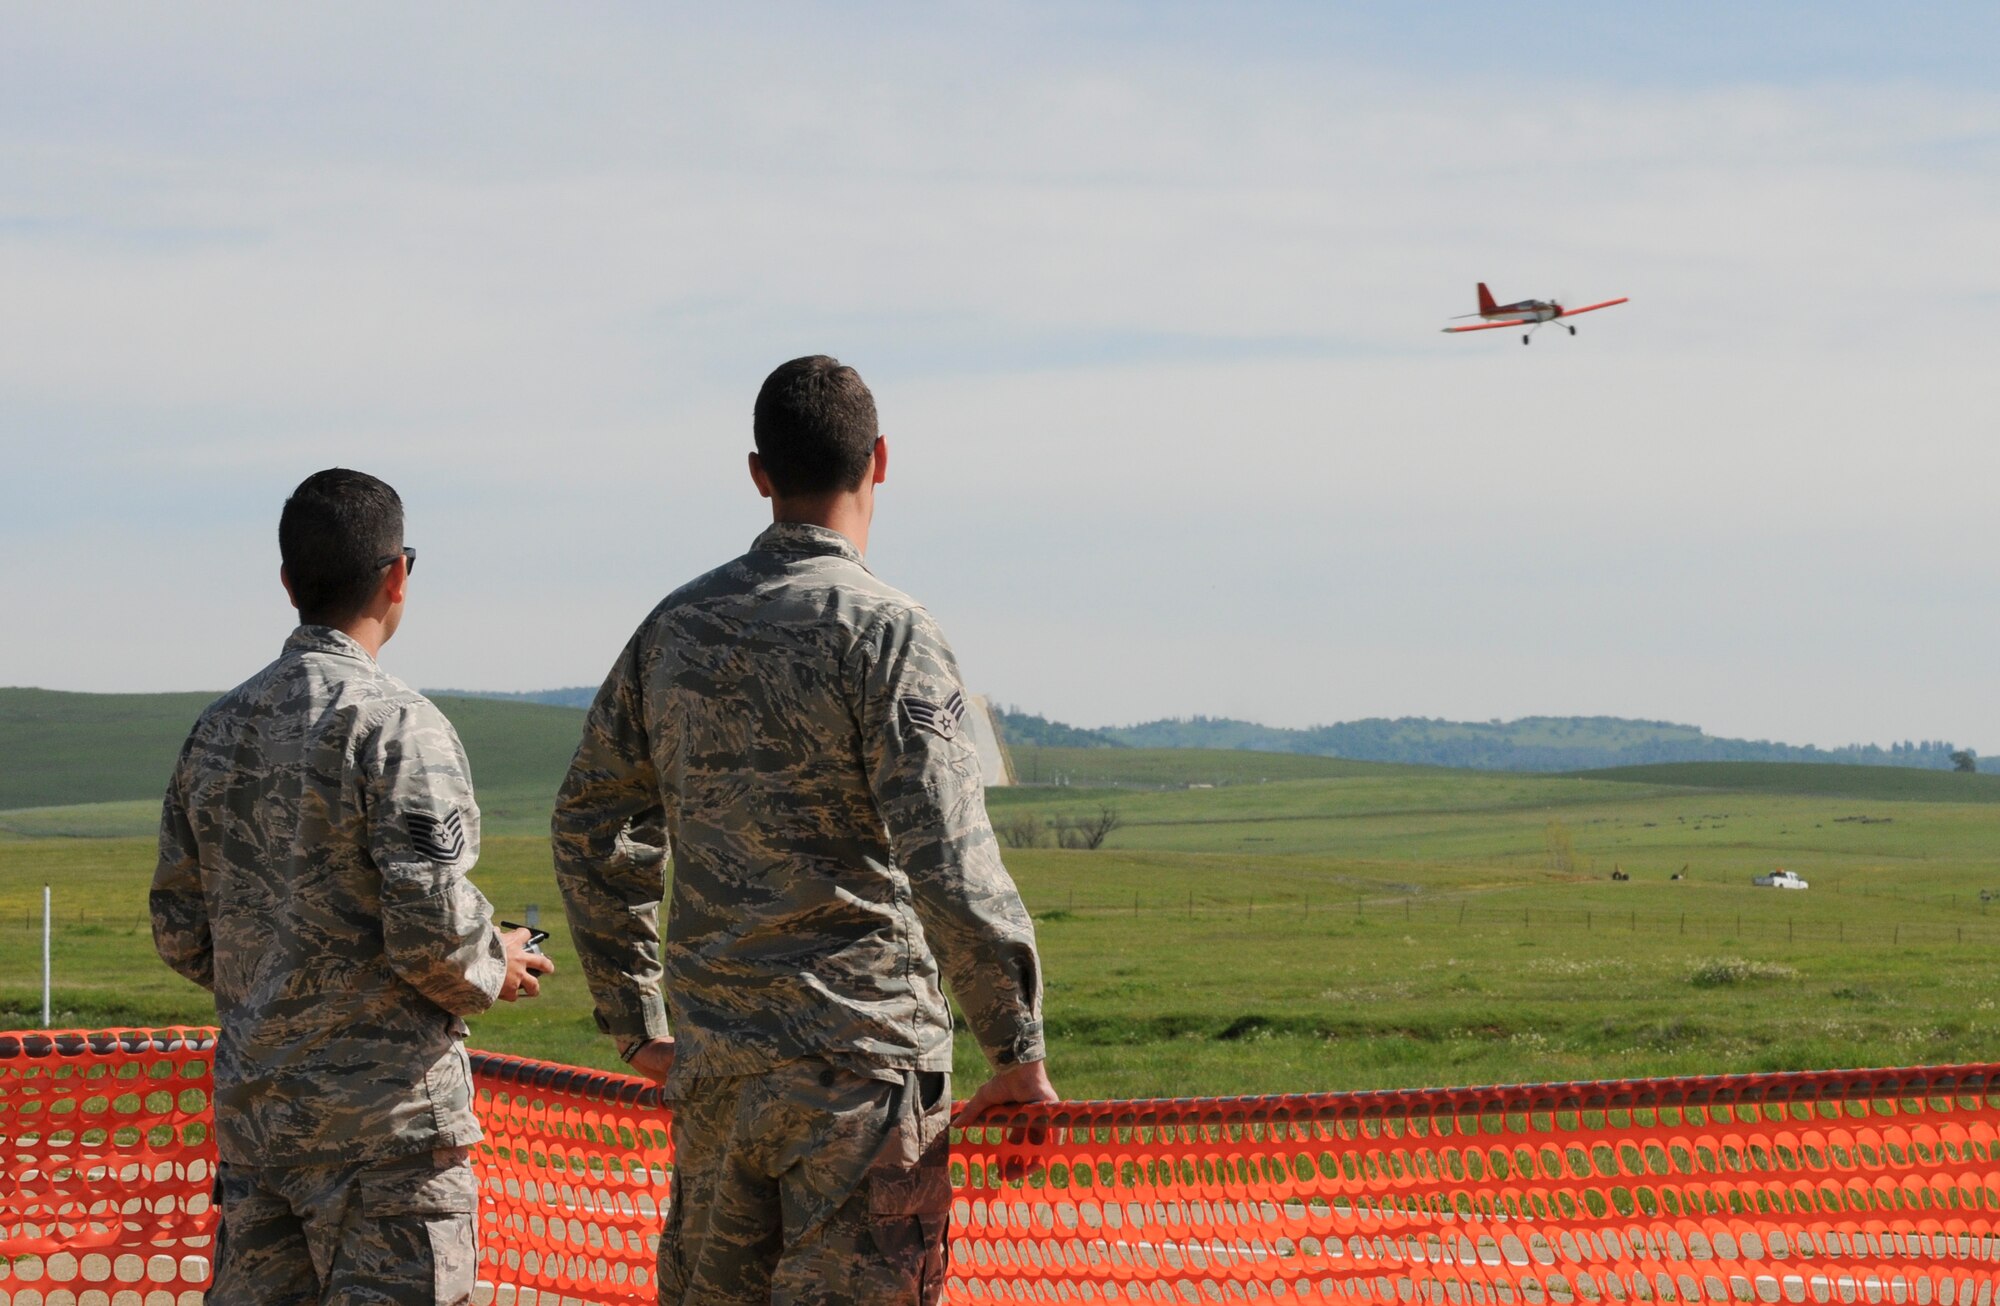 Tech. Sgt. Michael Carrillo (left), 349th Air Mobility Wing Detachment 1 KC-135 crew chief, flies a radio-controlled aircraft as an Airman observes at Beale Air Force Base, California March 25, 2016. Carrillo has been a member of the Beale Blackbirds Radio Control Club for more than six months. (U.S. Air Force photo by Senior Airman Michael J. Hunsaker)